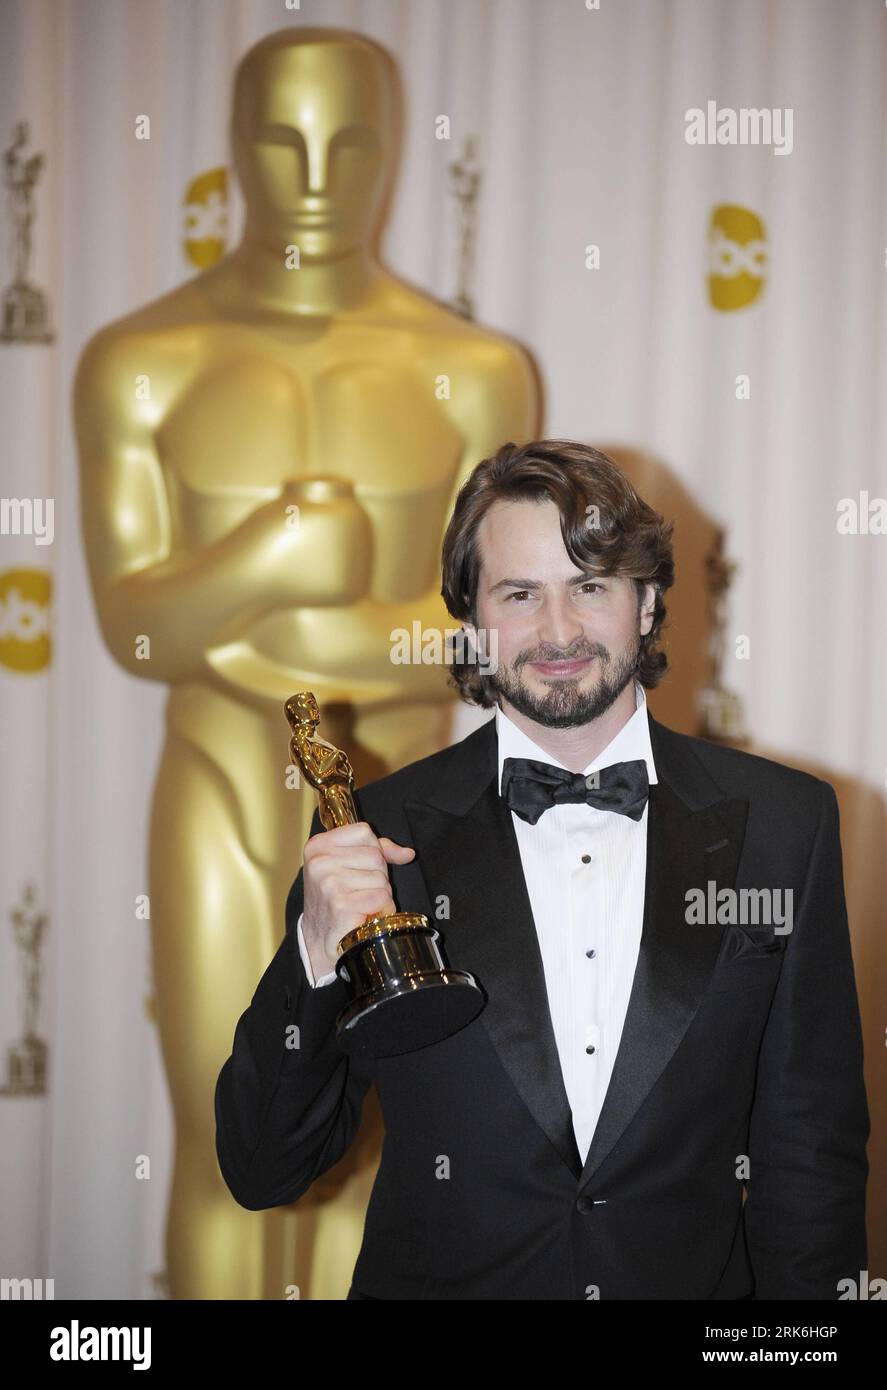 Bildnummer: 53842877  Datum: 07.03.2010  Copyright: imago/Xinhua (100308) -- HOLLYWOOD, March 8, 2010 (Xinhua) -- Mark Boal holds the trophy after winning the best Original Screenplay of the 82nd Academy Awards for The Hurt Locker at the Kodak Theater in Hollywood, California, the United States, March 7, 2010. (Xinhua/Qi Heng) (zw) (44)US-HOLLYWOOD-OSCARS-TROPHY PUBLICATIONxNOTxINxCHN People Film 82. Annual Academy Awards Oscar Oscars Preisträger Trophäe Objekte Highlight kbdig xmk 2010 hoch    Bildnummer 53842877 Date 07 03 2010 Copyright Imago XINHUA  Hollywood March 8 2010 XINHUA Mark Boal Stock Photo